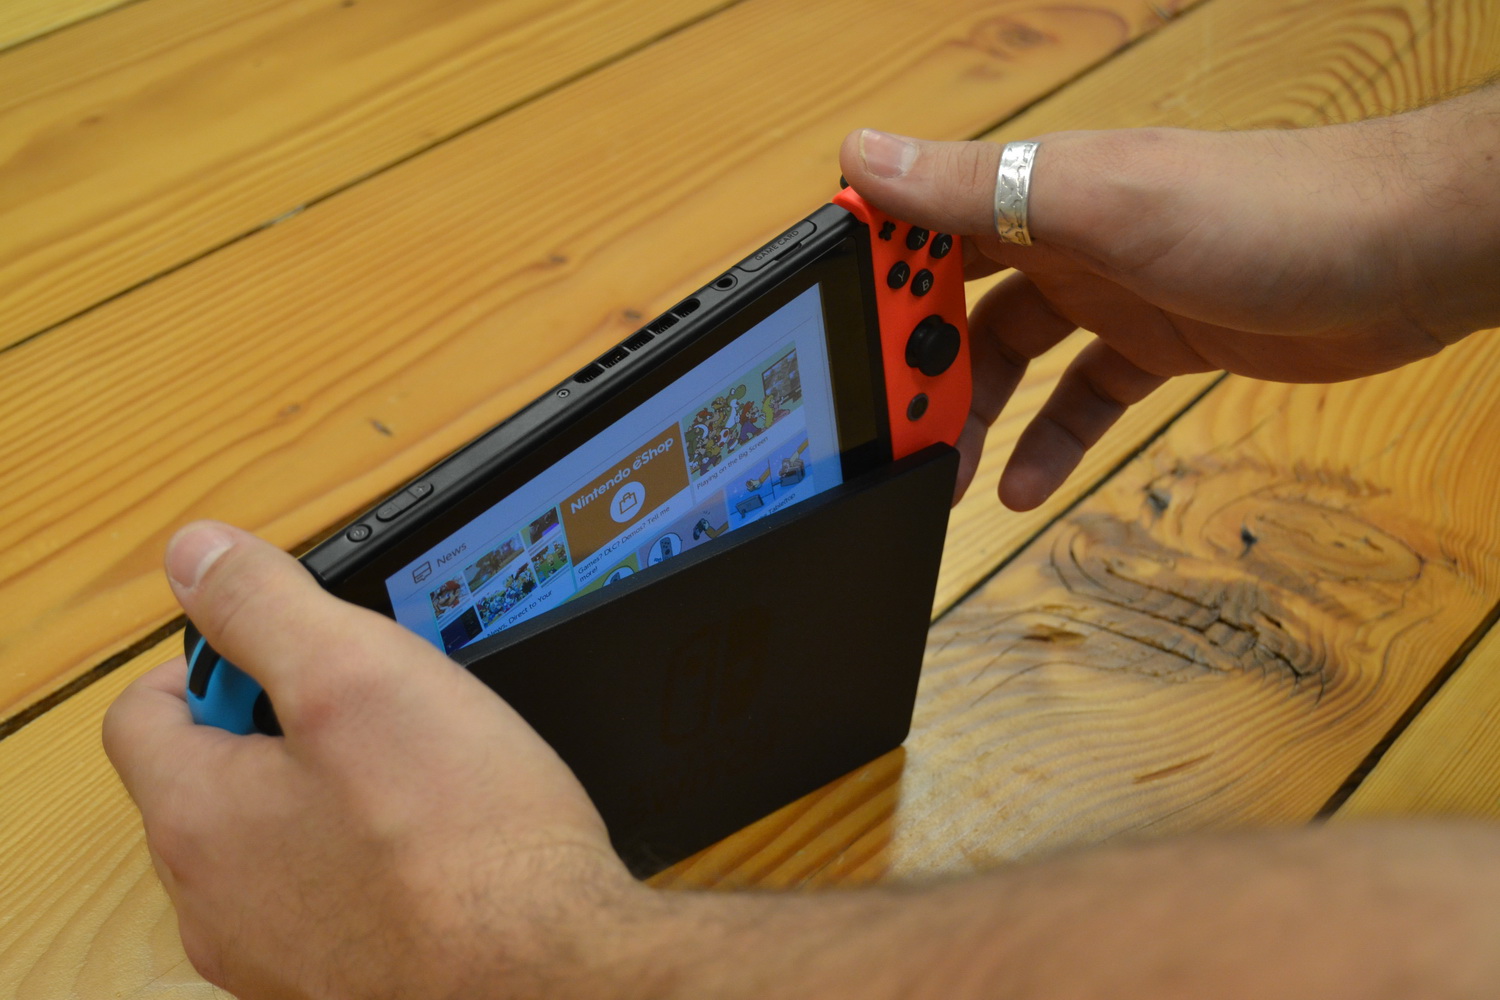 Nintendo will fix your busted Switch Joy-Con: here's why - CNET